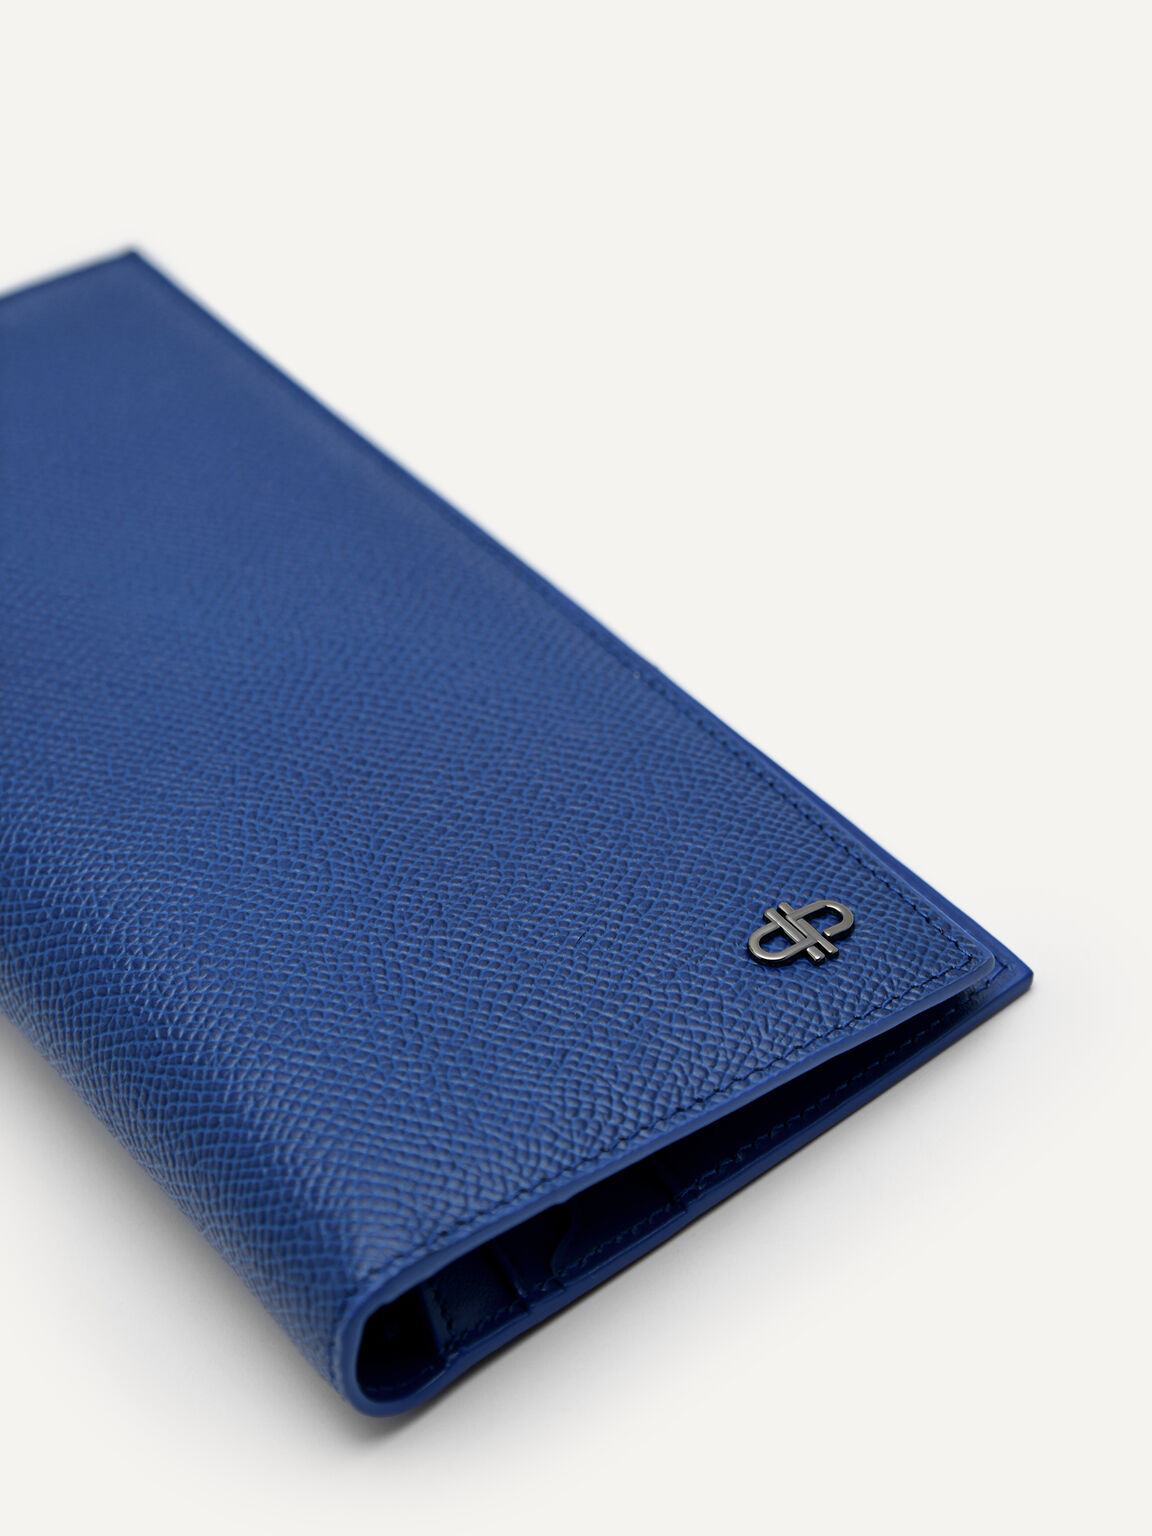 PEDRO Icon Leather Long Wallet, Navy, hi-res